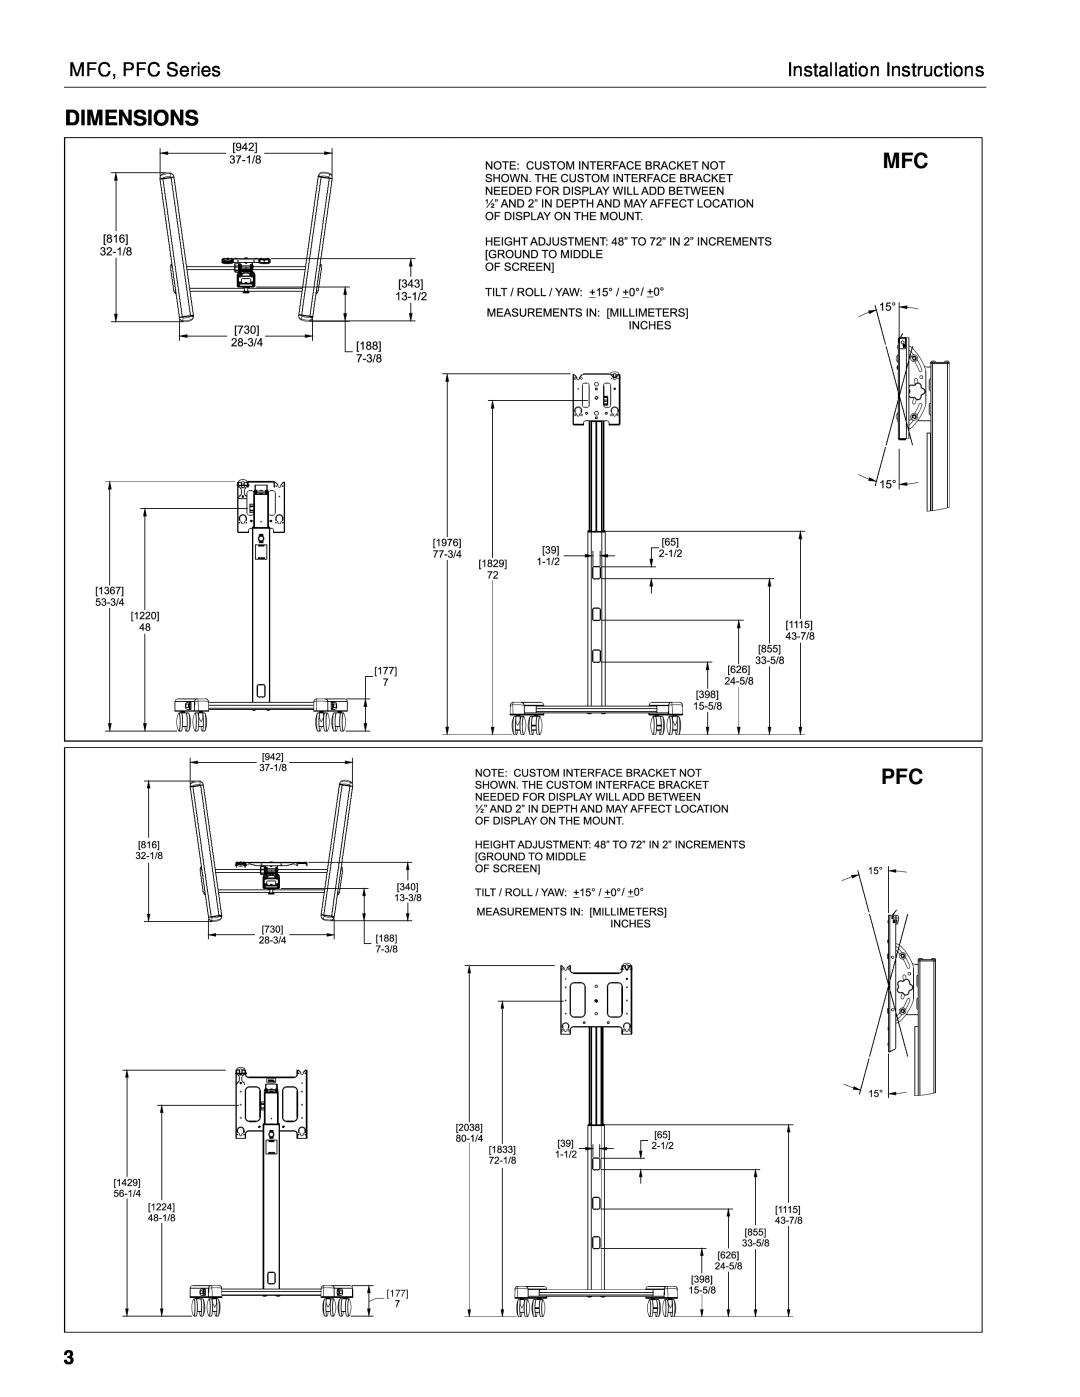 Chief Manufacturing MFC Series installation instructions Dimensions Mfc Pfc, MFC, PFC Series, Installation Instructions 